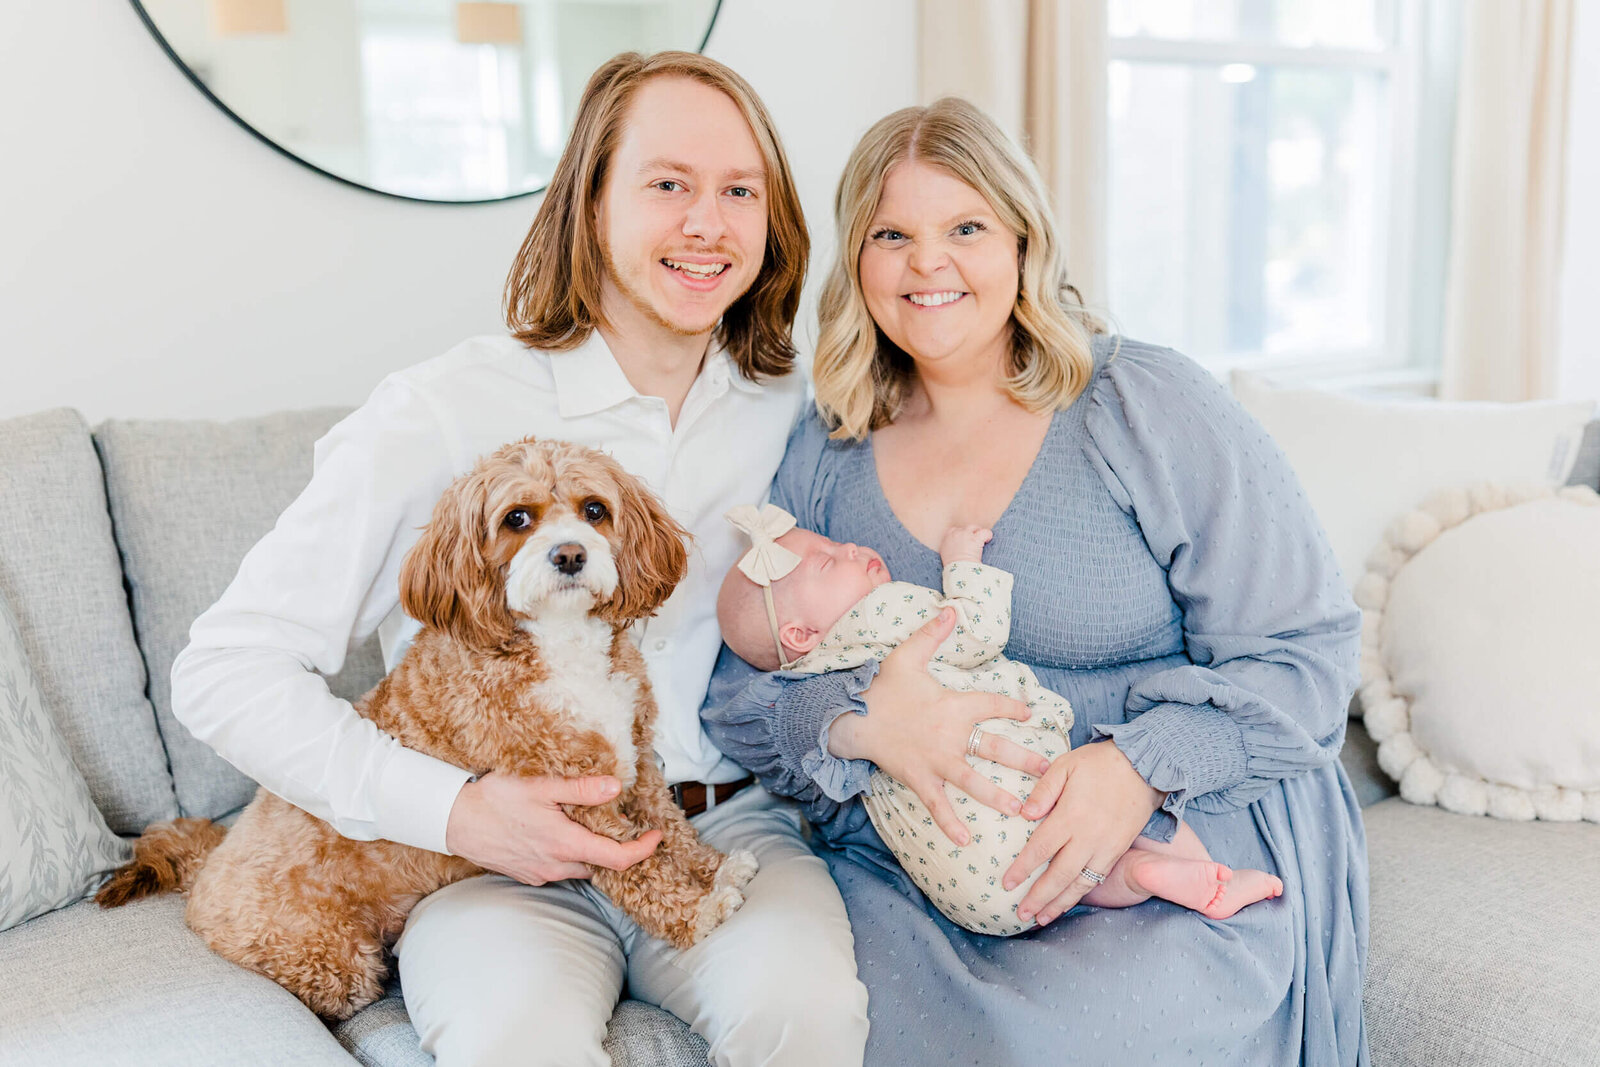 Mom and dad smile with their newborn and dog